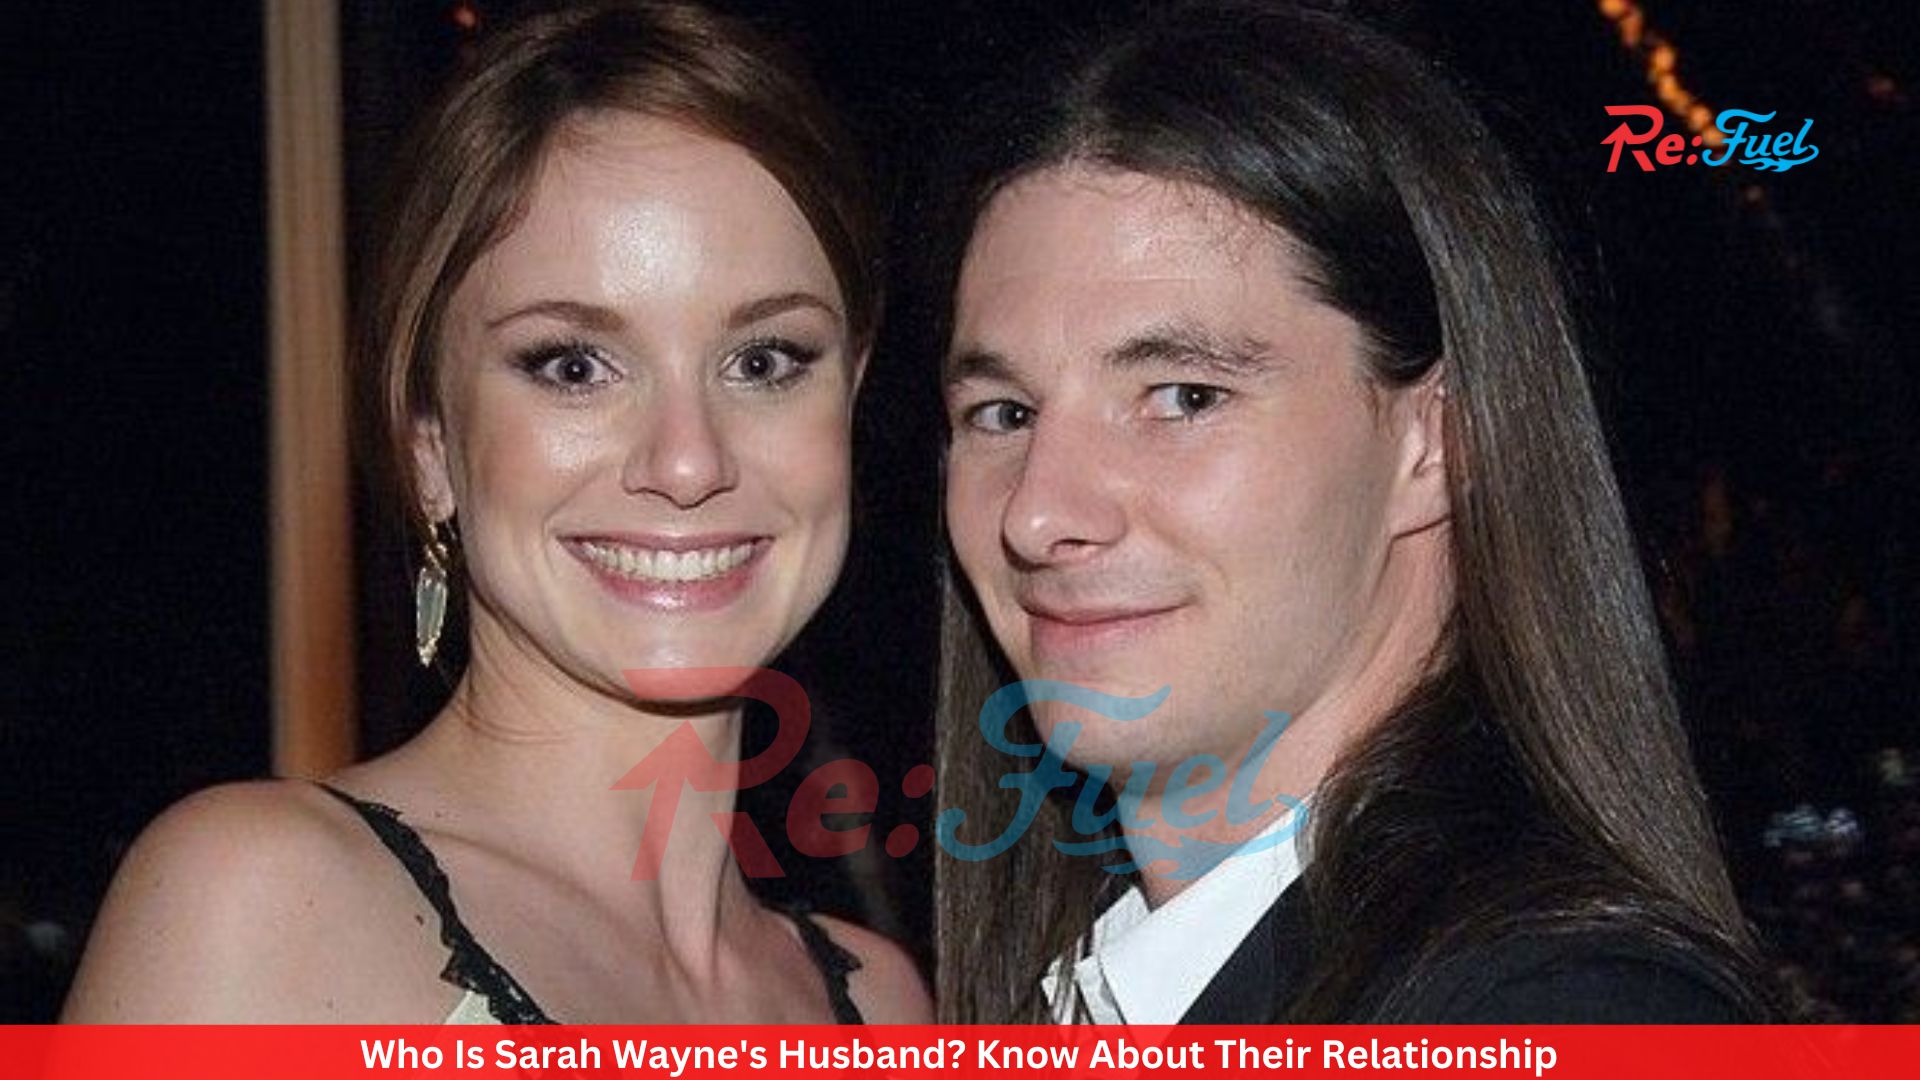 Who Is Sarah Wayne's Husband? Know About Their Relationship